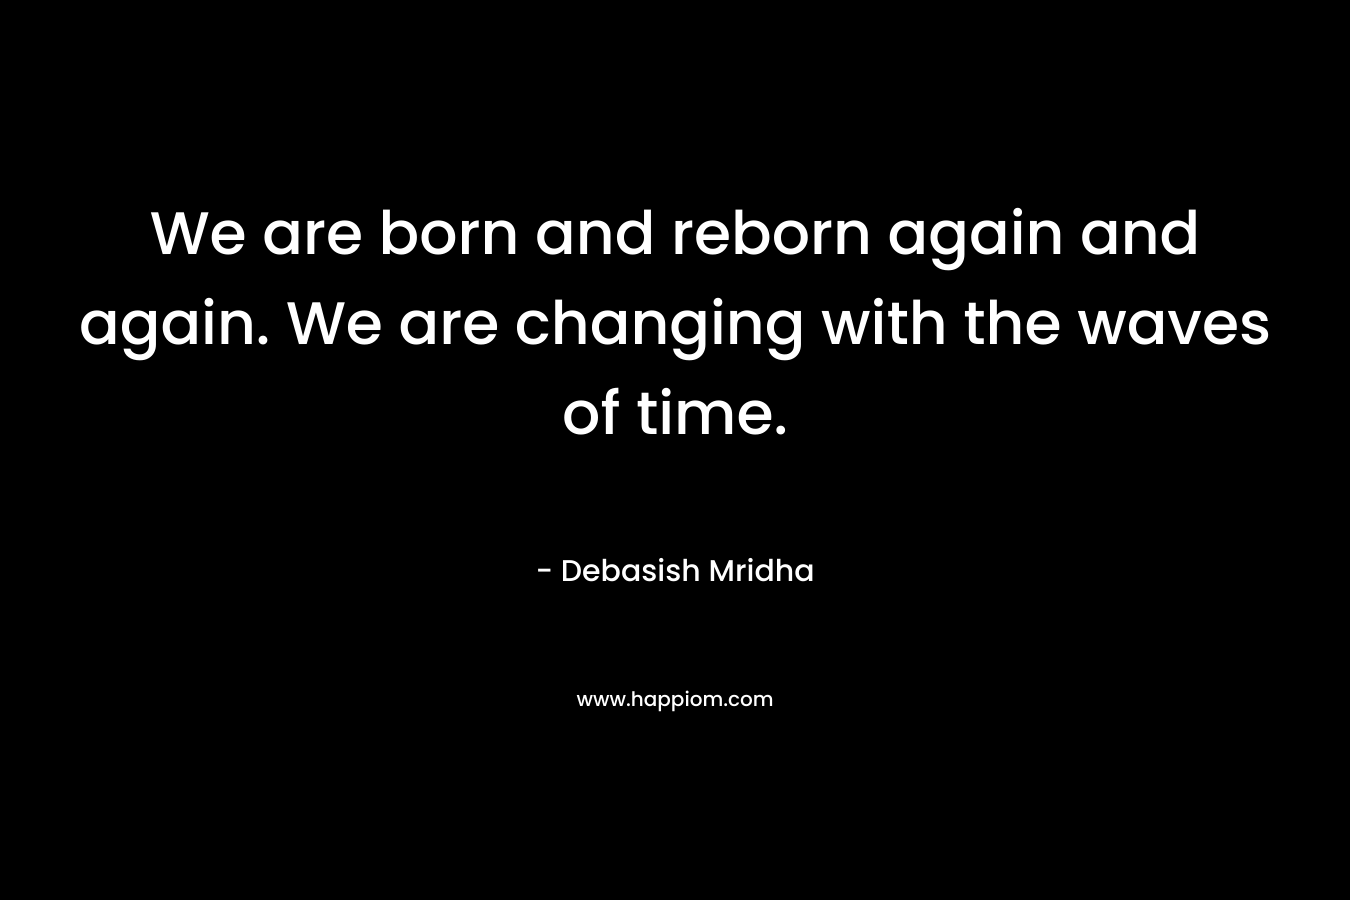 We are born and reborn again and again. We are changing with the waves of time.